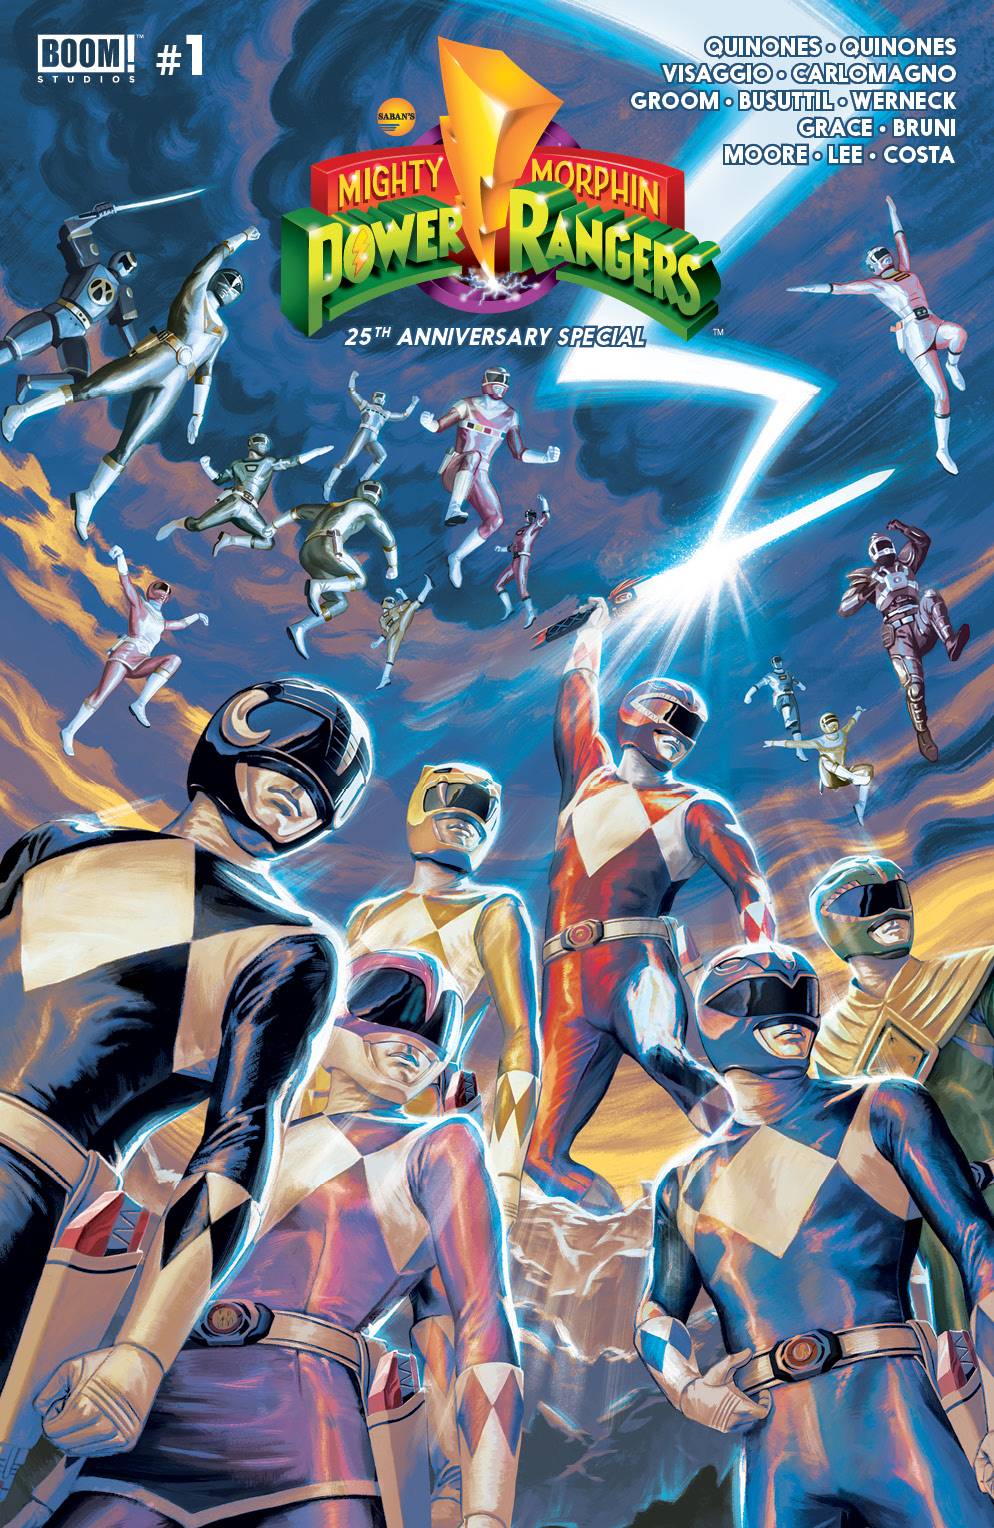 MIGHTY MORPHIN POWER RANGERS ANNIVERSARY SPECIAL #1 2918